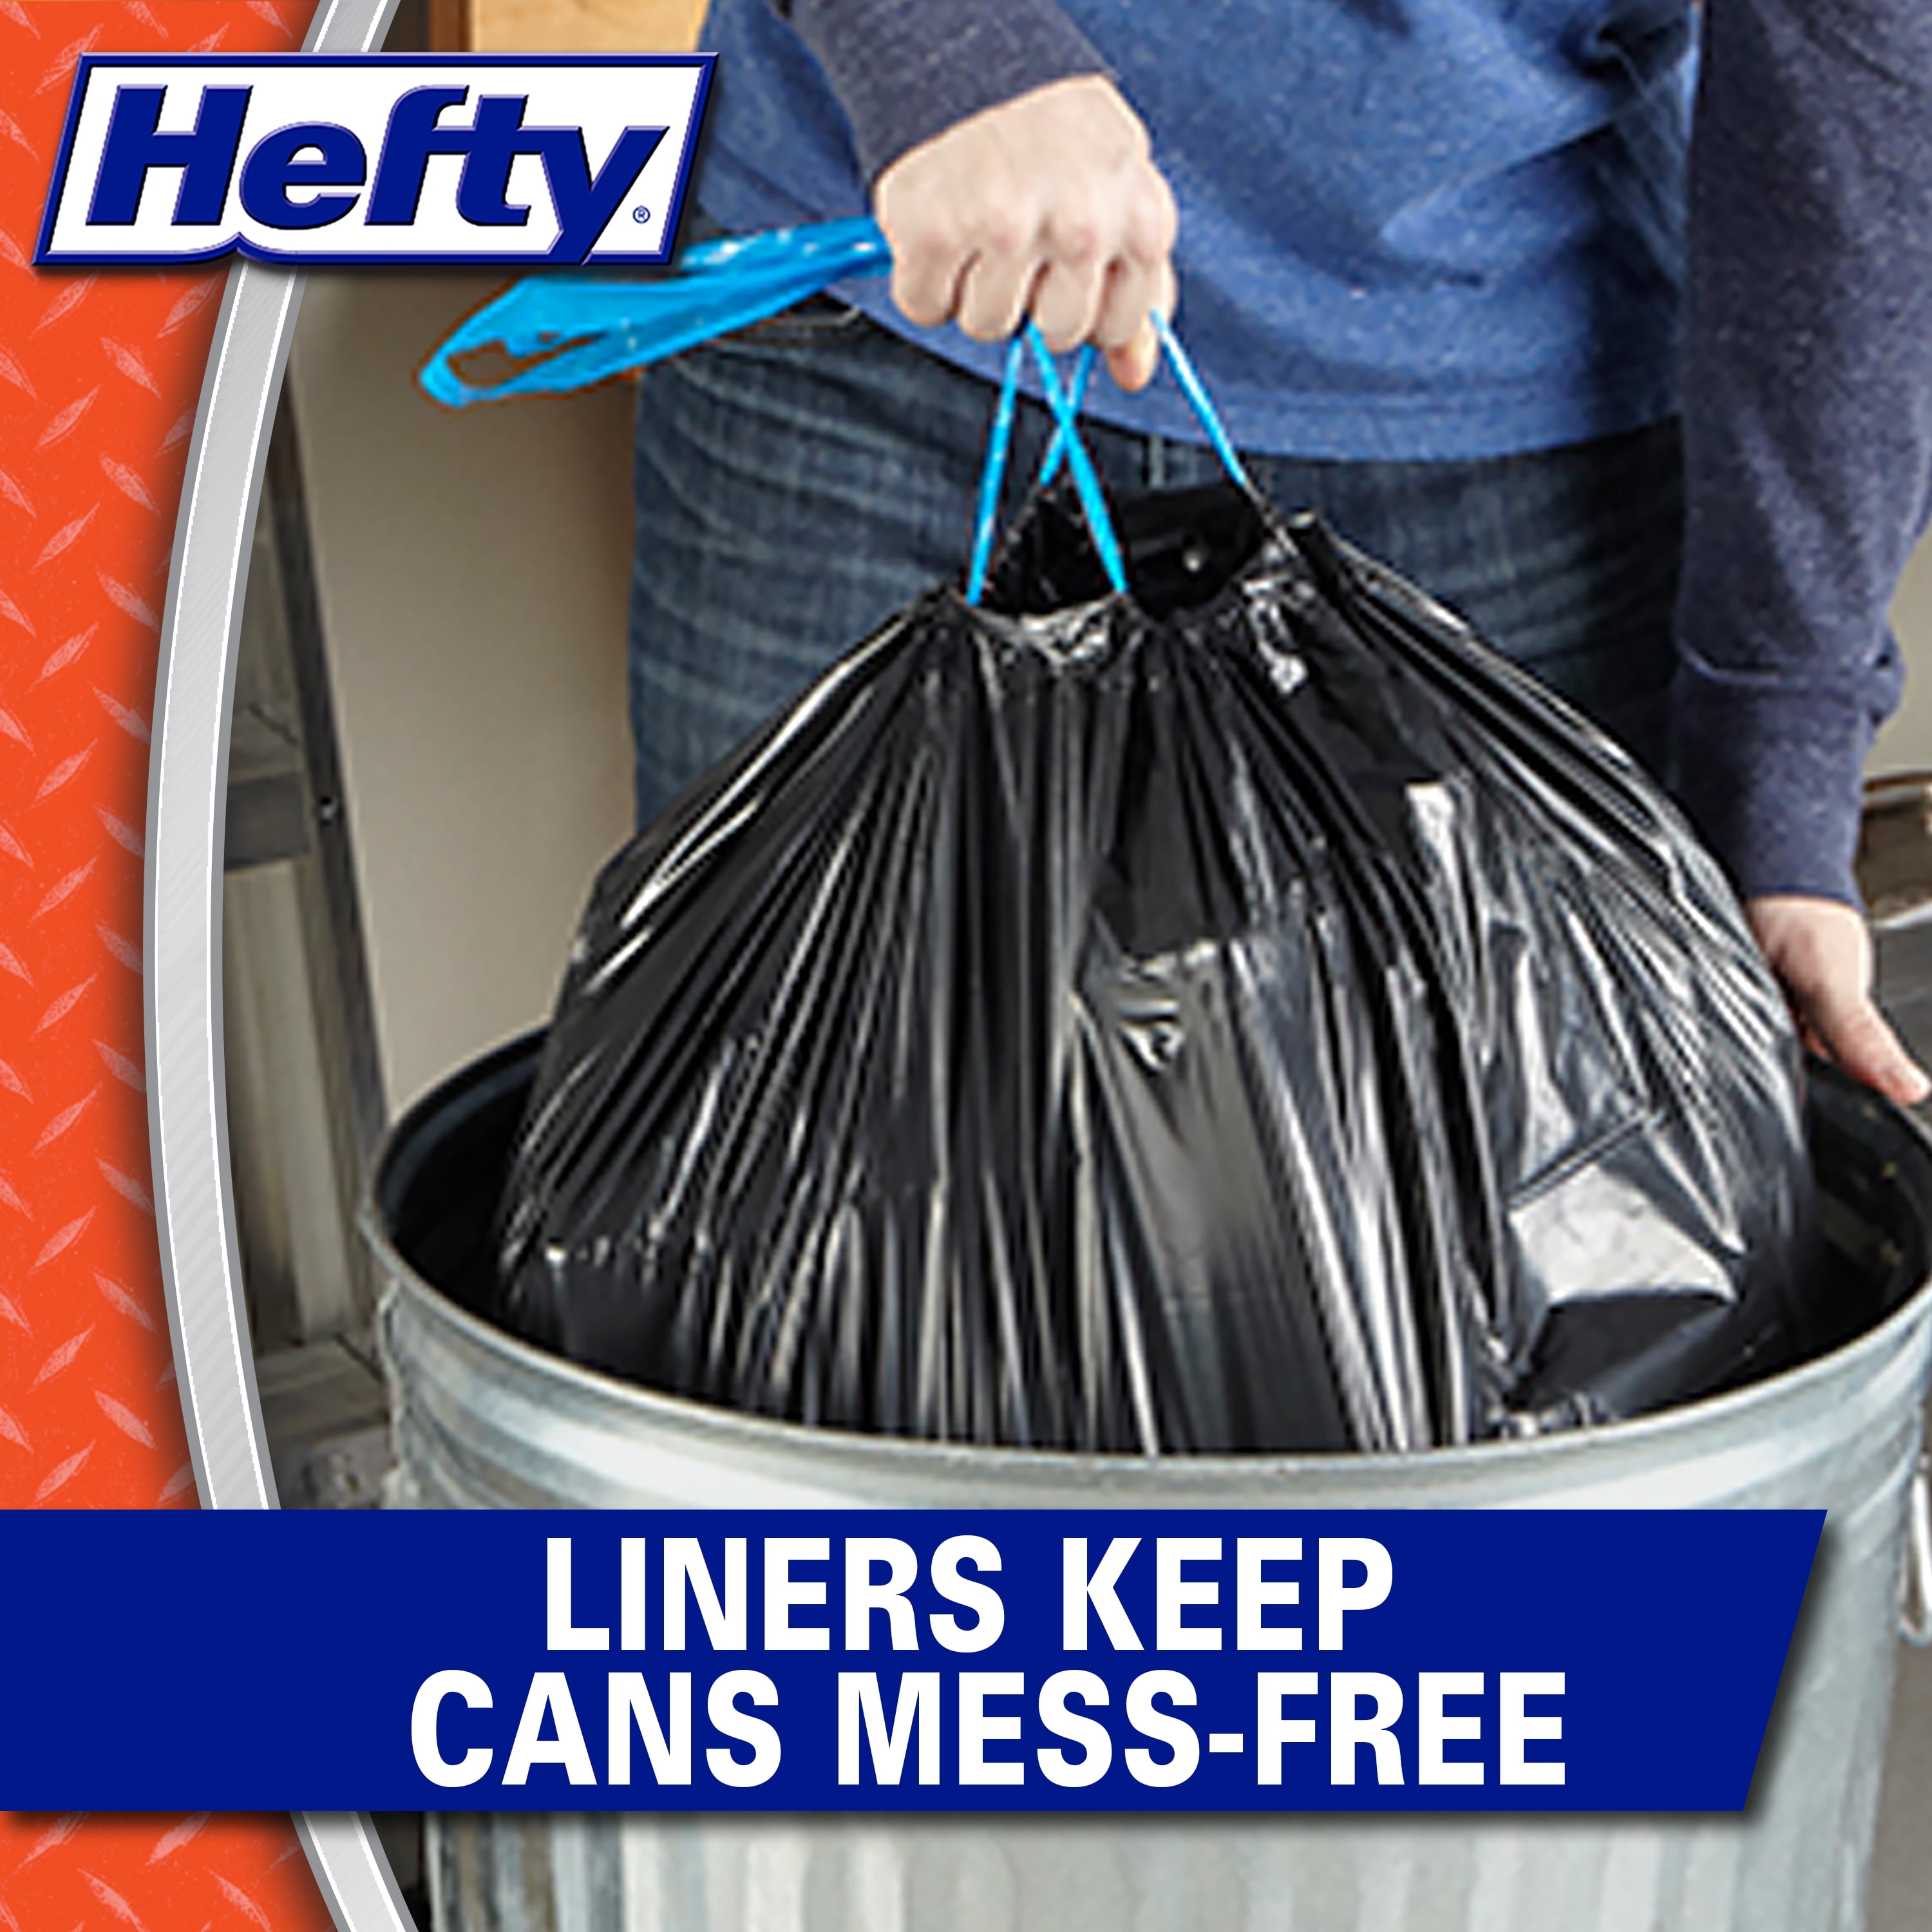 Hefty Trash Bags Drawstring Multipurpose Extra Strong 30 Gallon - 28 Count  - ACME Markets